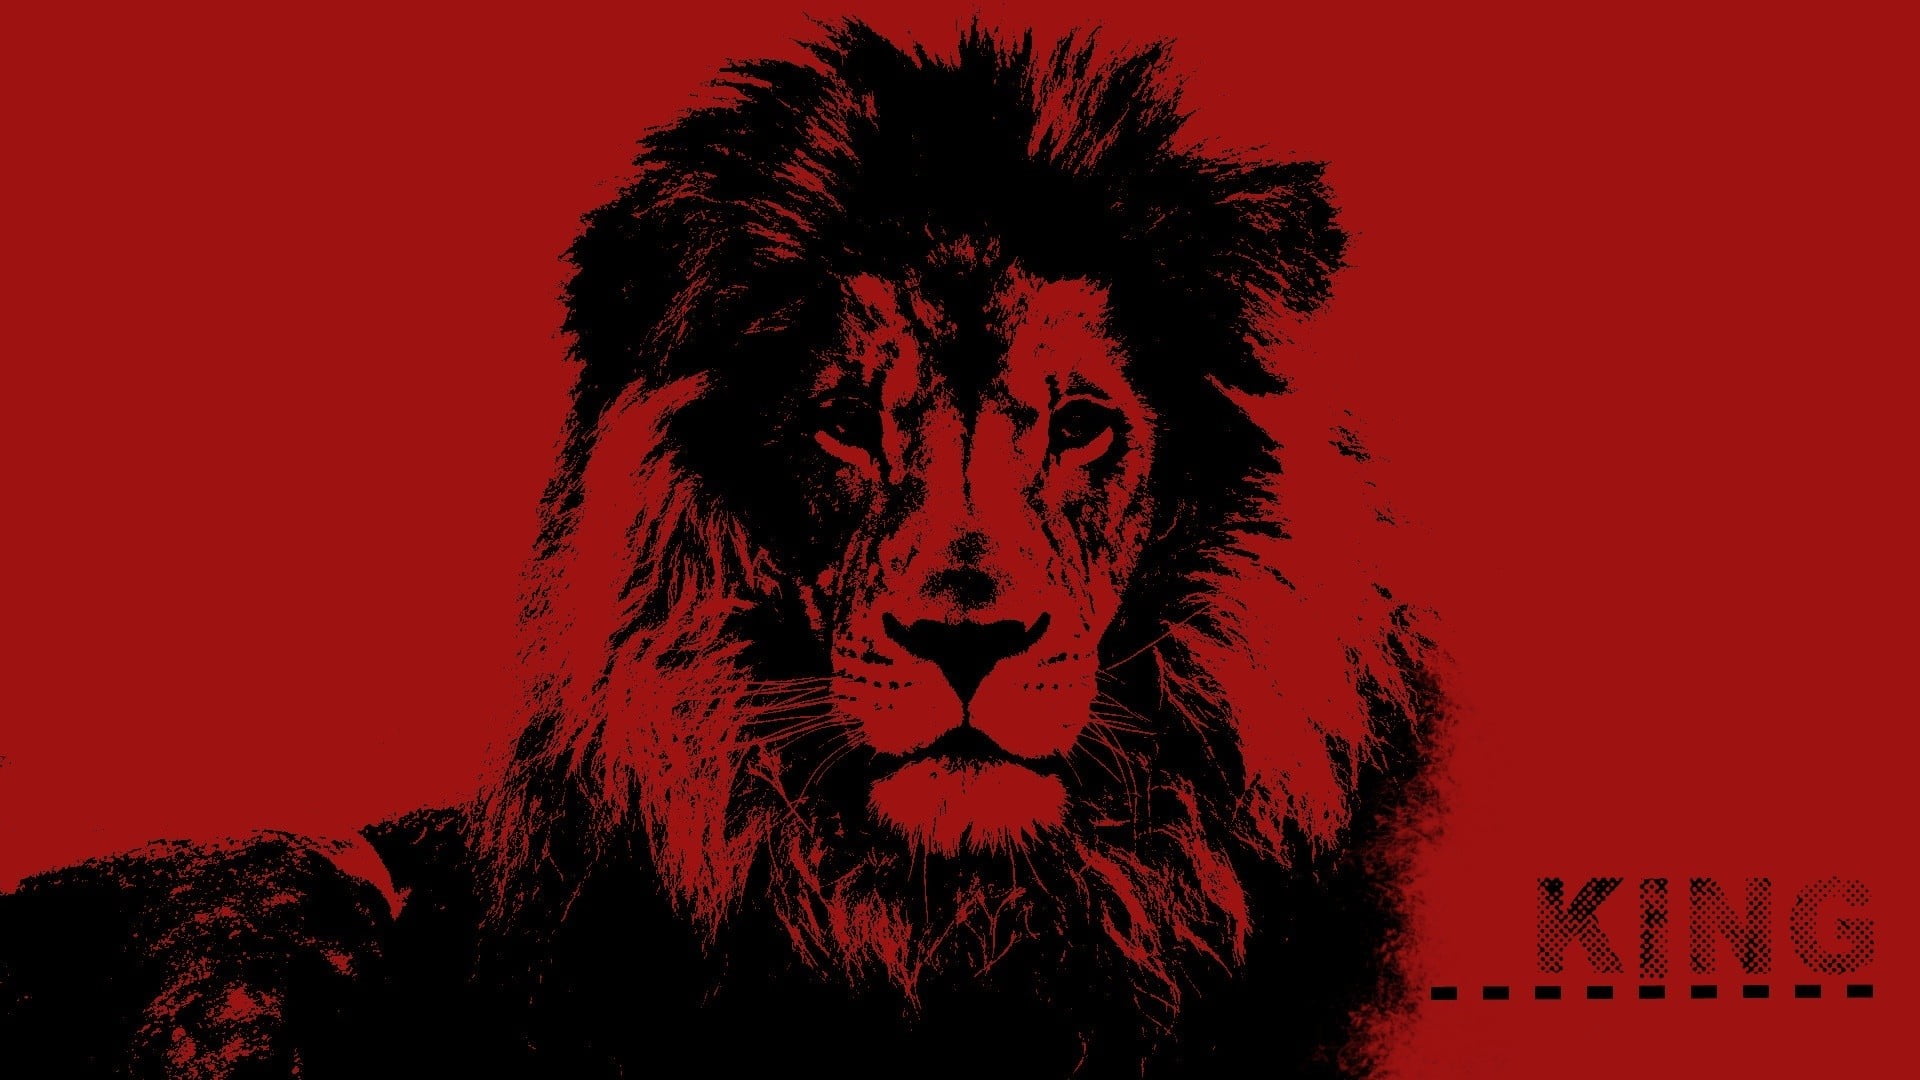 Abstract Lion Wallpaper Hd